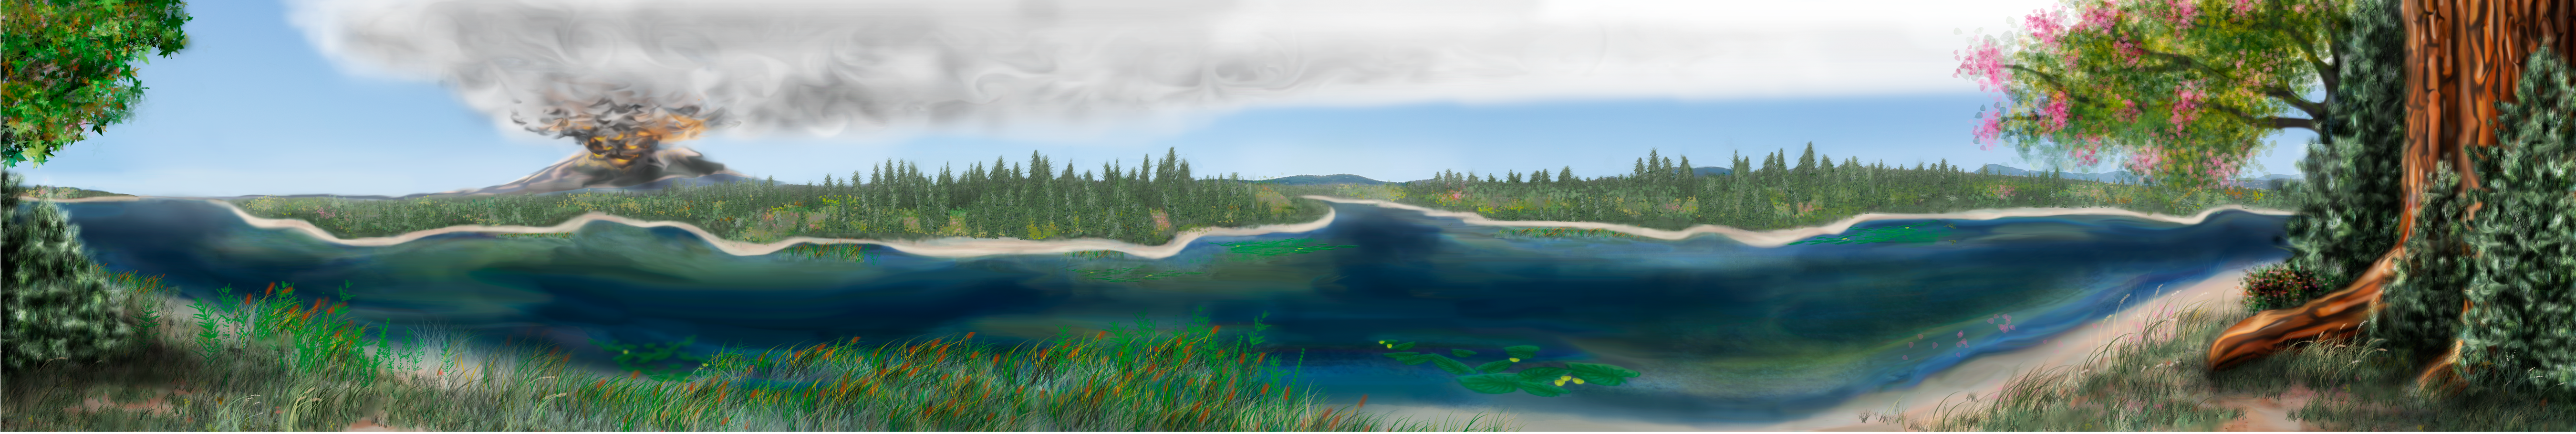 Artist reconstruction, a panoramic image of a lake bordered by trees with a volcano erupting in the distance.